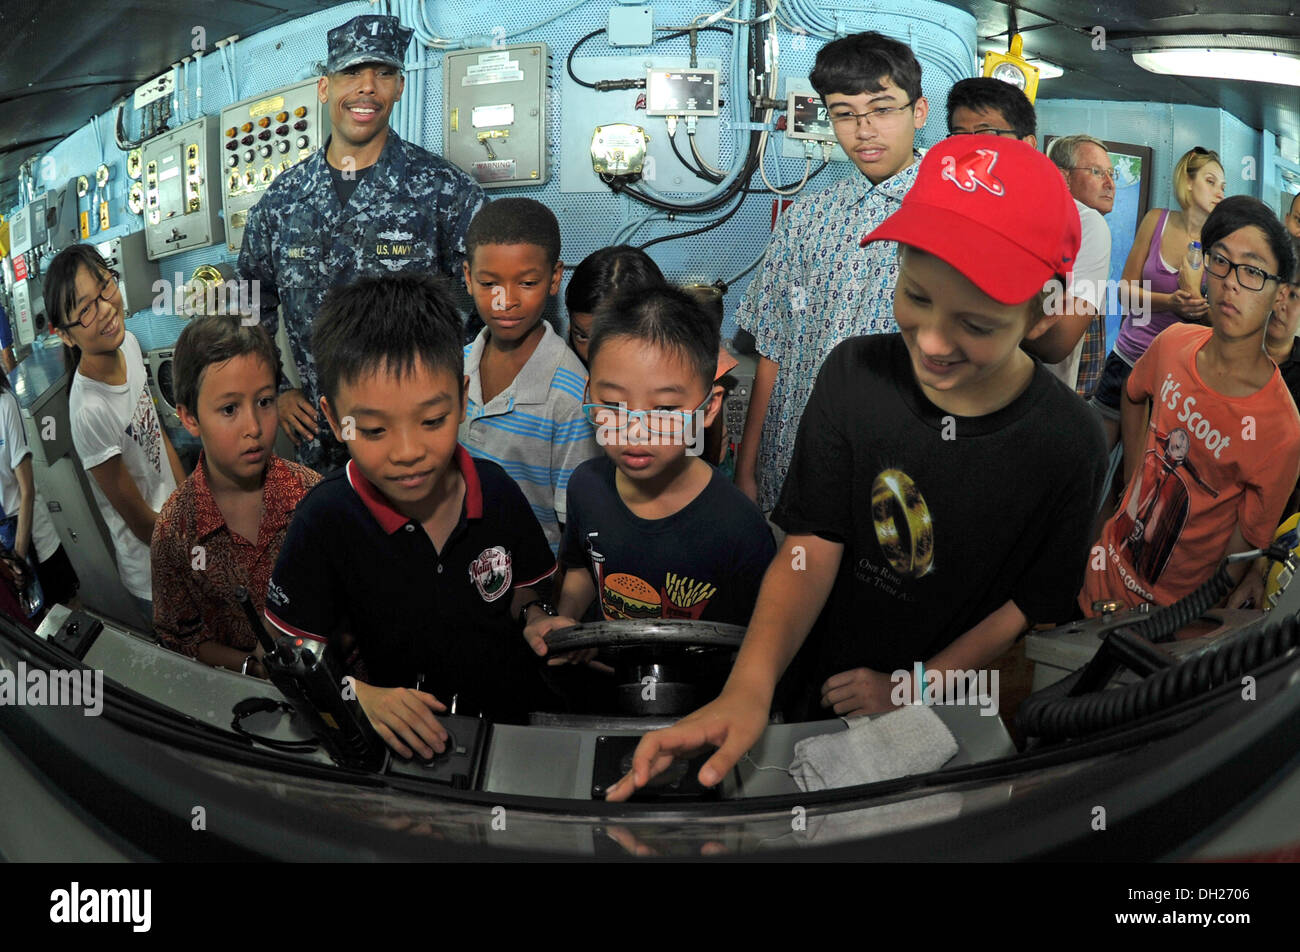 REPUBLIC OF SINGAPORE (Oct. 27, 2013) Lt. j.g. Derrick Ingle, top-left, assistant public affairs officer aboard the aircraft carrier USS George Washington (CVN 73), discusses the functions of the helm in the navigation bridge to children during a ship tou Stock Photo